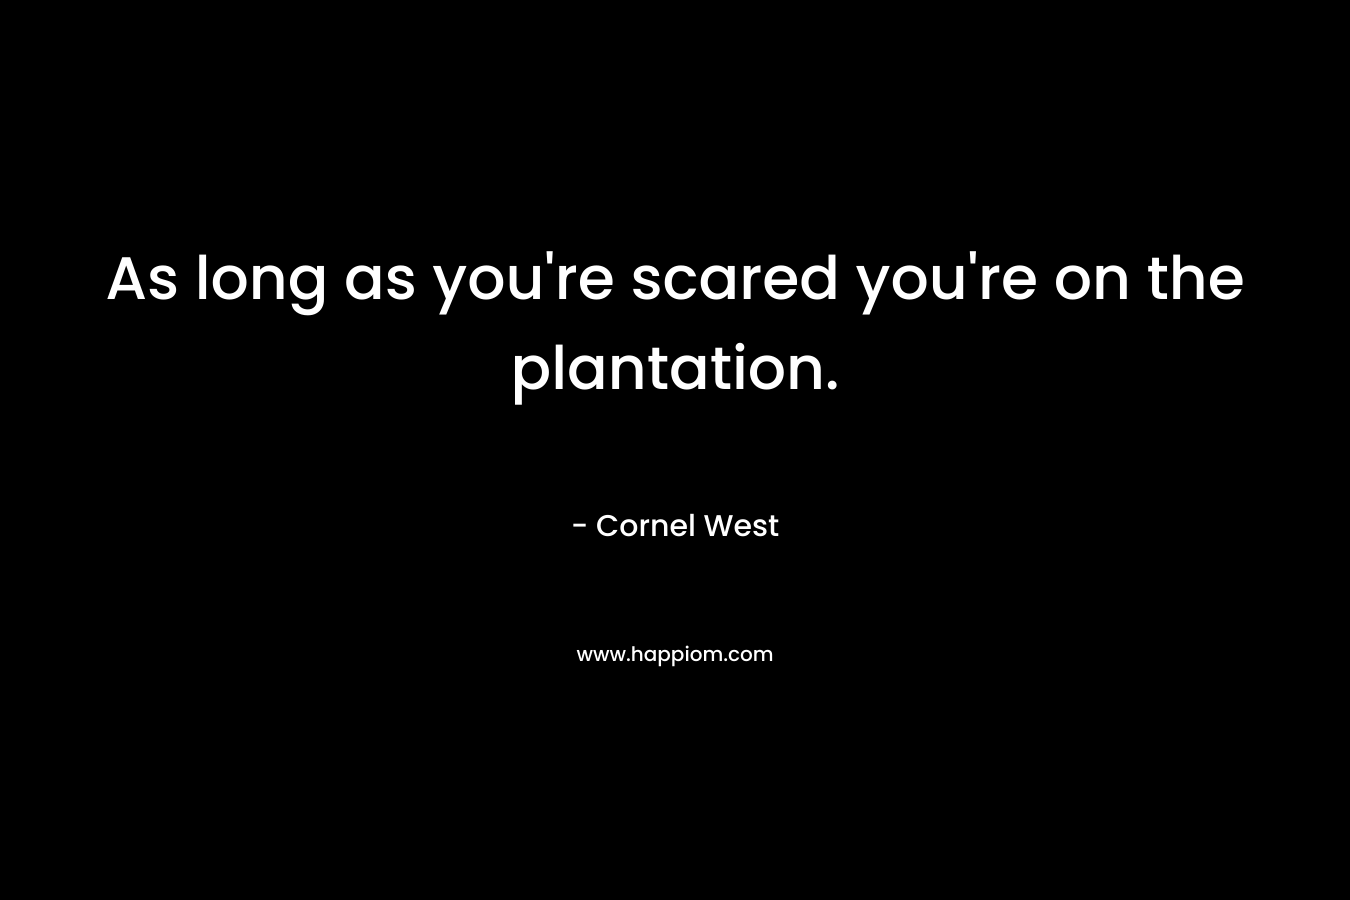 As long as you're scared you're on the plantation.